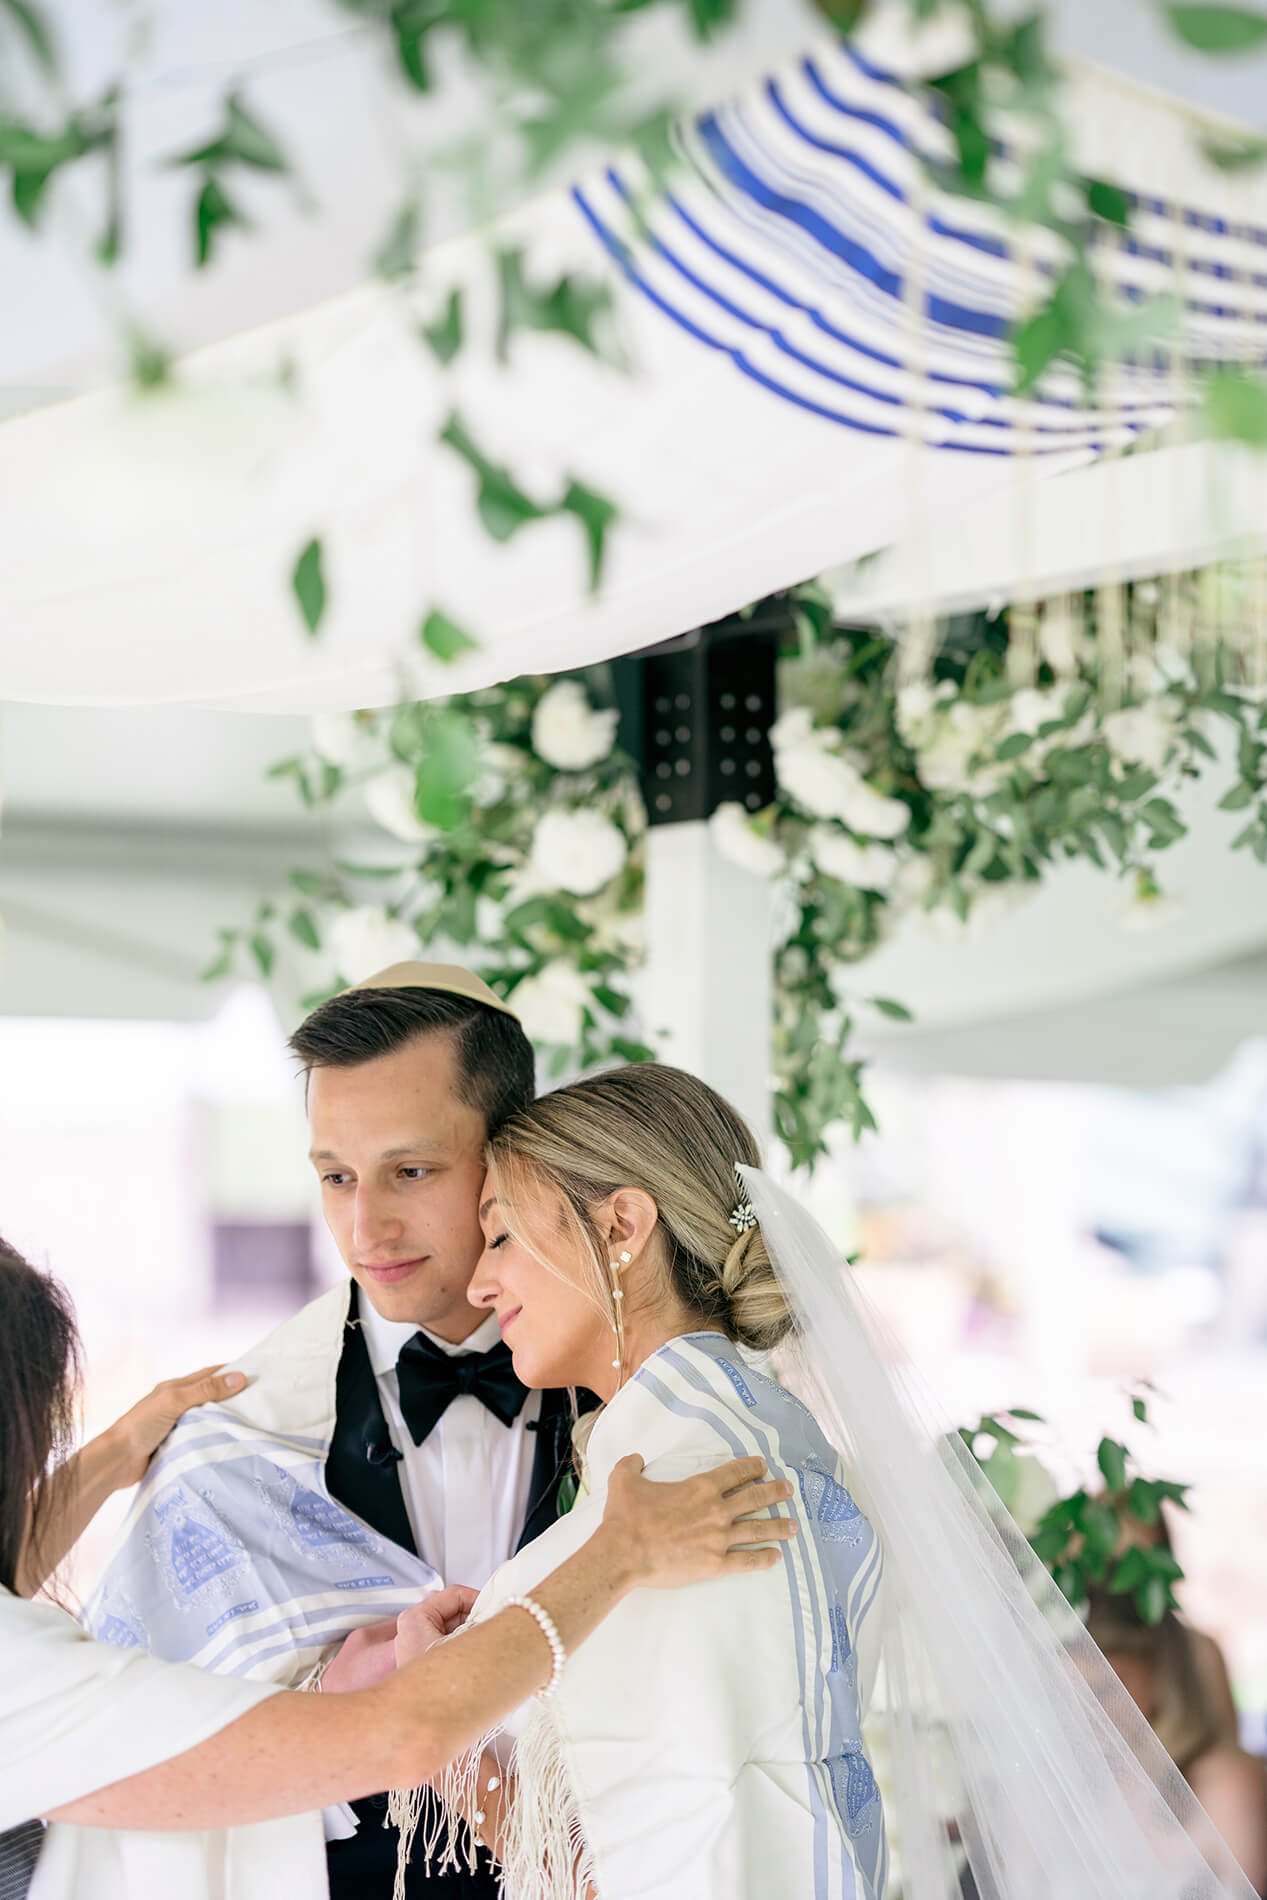 bride and groom with tallit prayer shawl under the chuppah